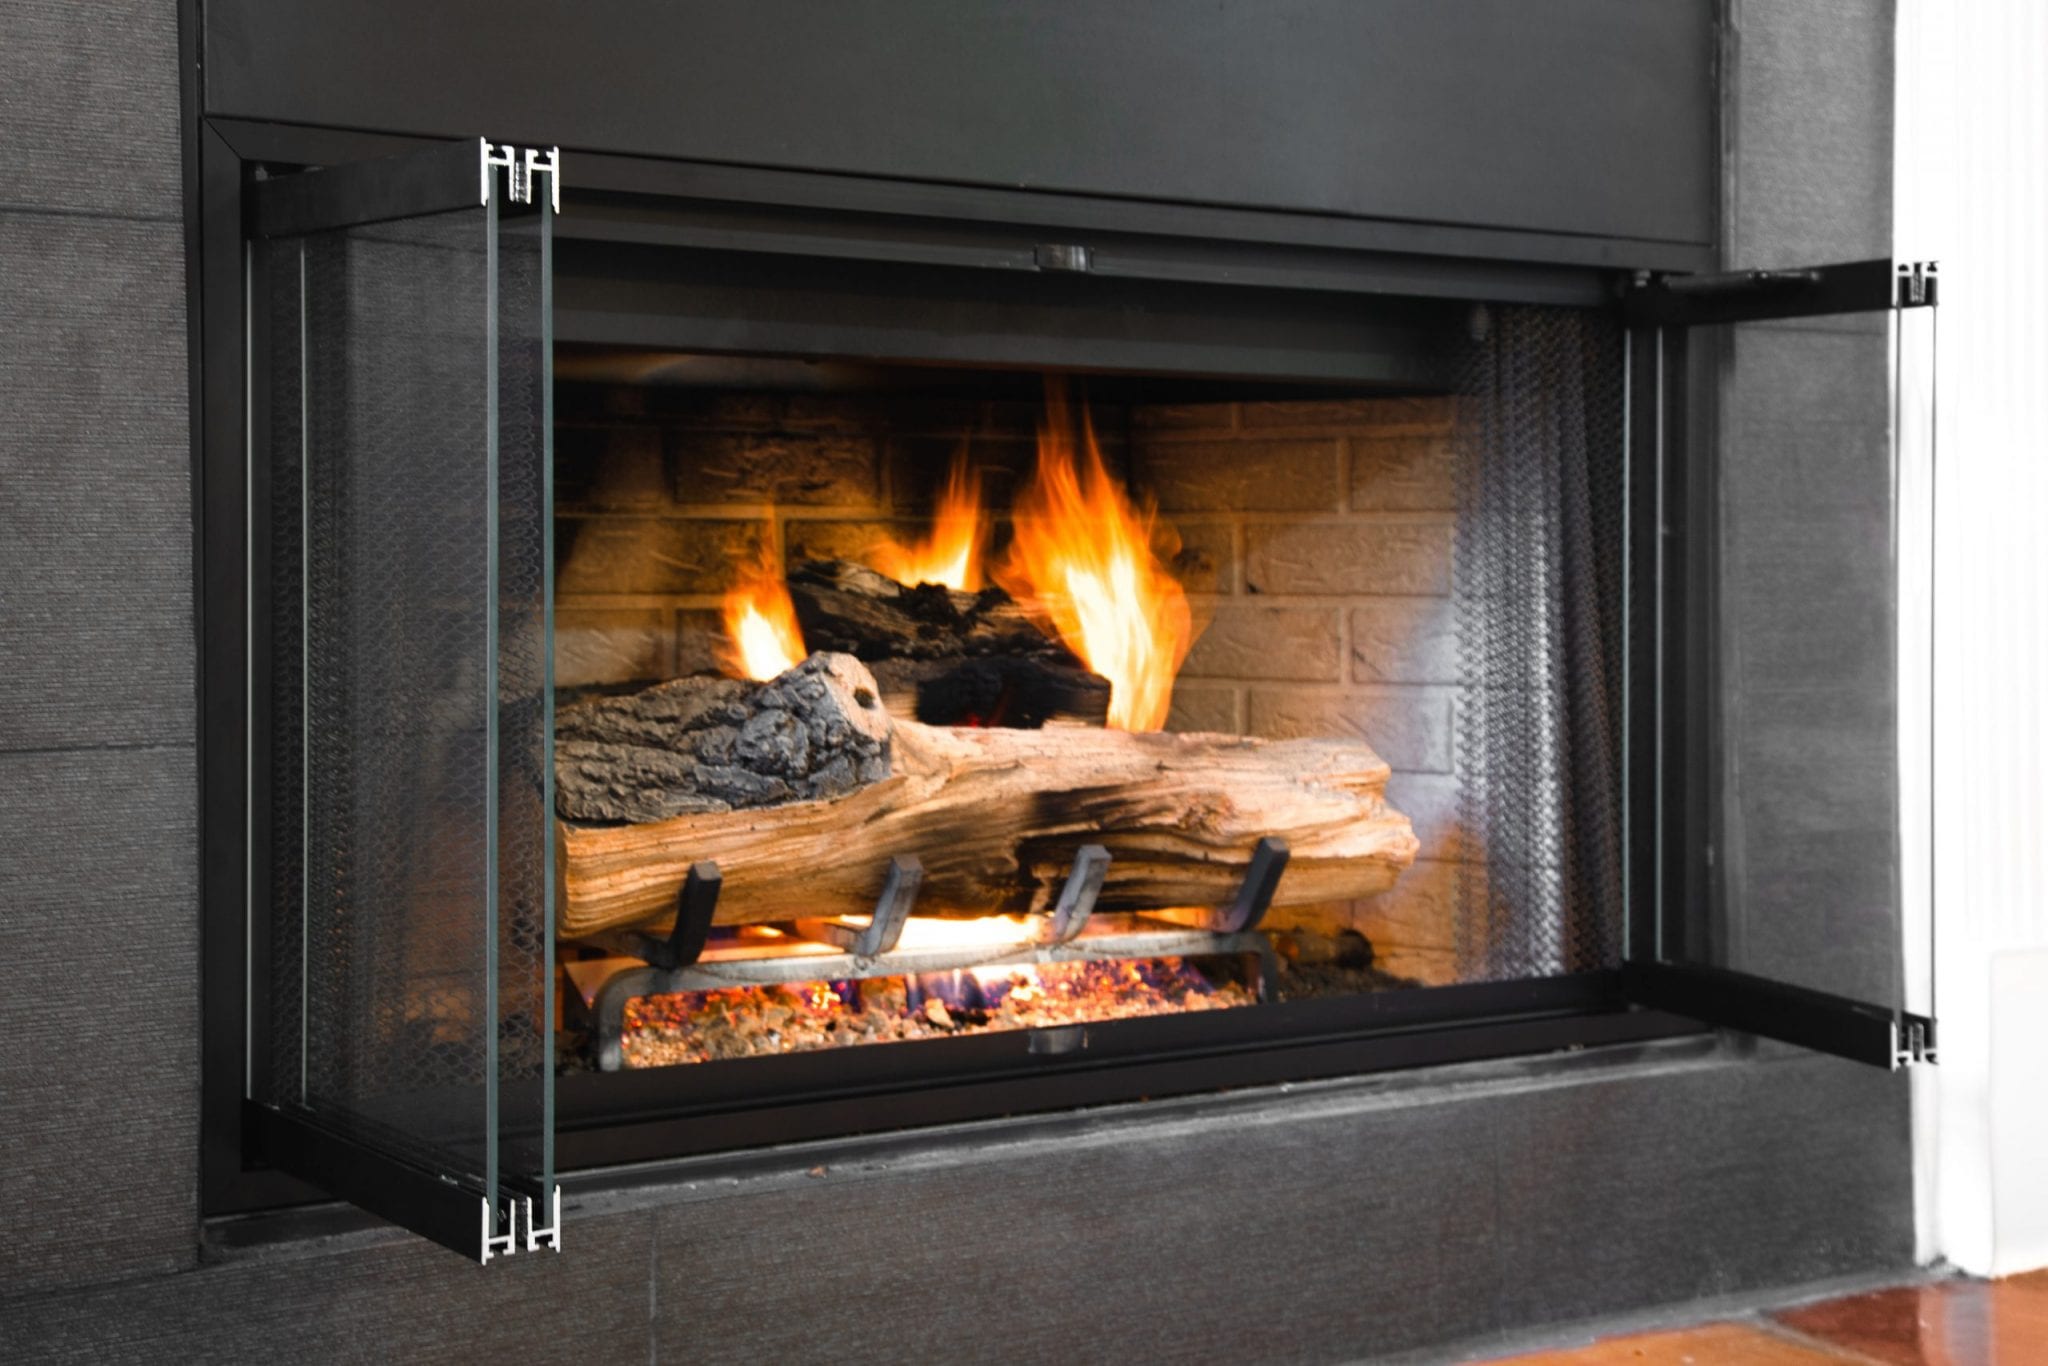 Replacement Glass Doors for Gas Fireplaces: Enhancing Safety, Efficiency, and Aesthetics